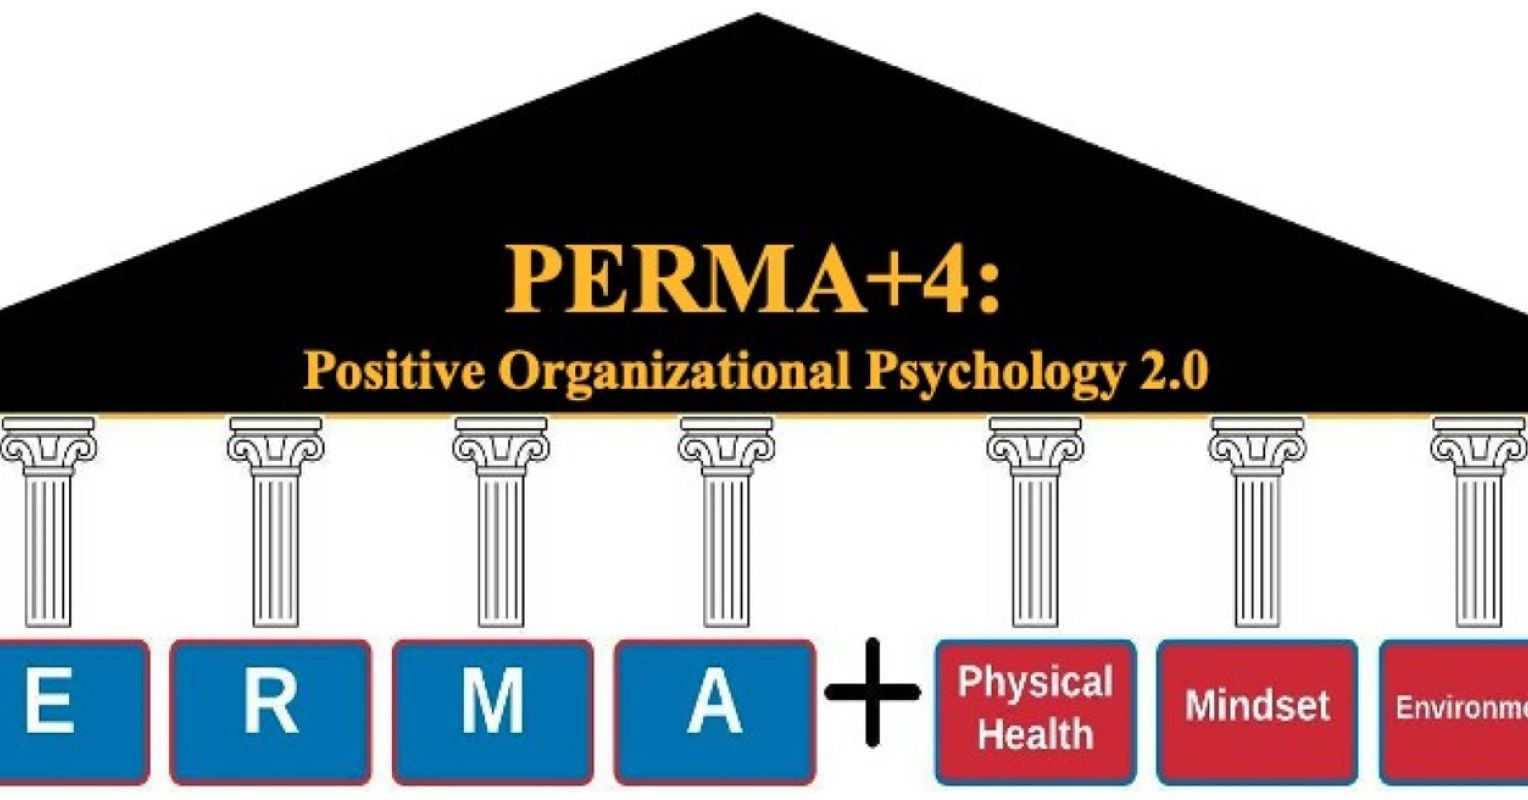 What Is PERMA Model? The PERMA Model In A Nutshell - FourWeekMBA